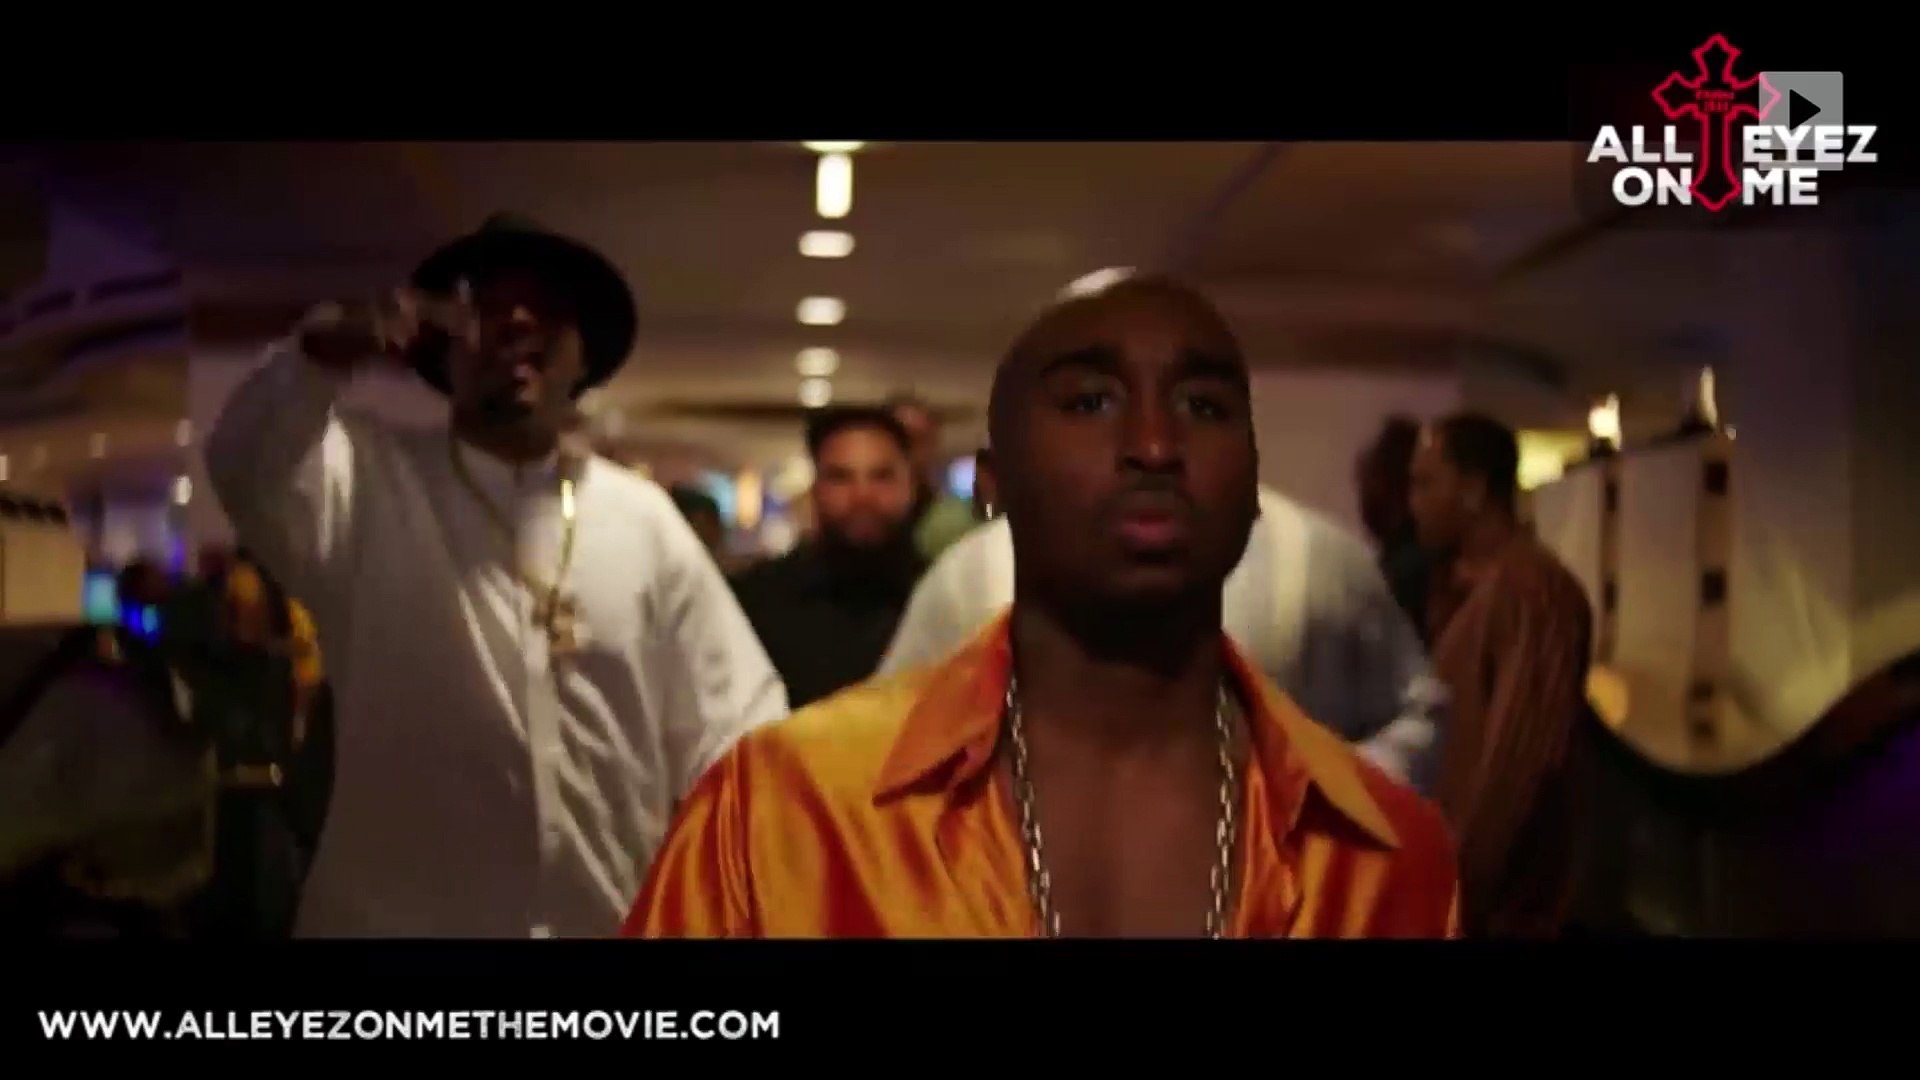 Watch Tupac Shakur in violent new 'All Eyez on Me' biopic trailer - video  Dailymotion